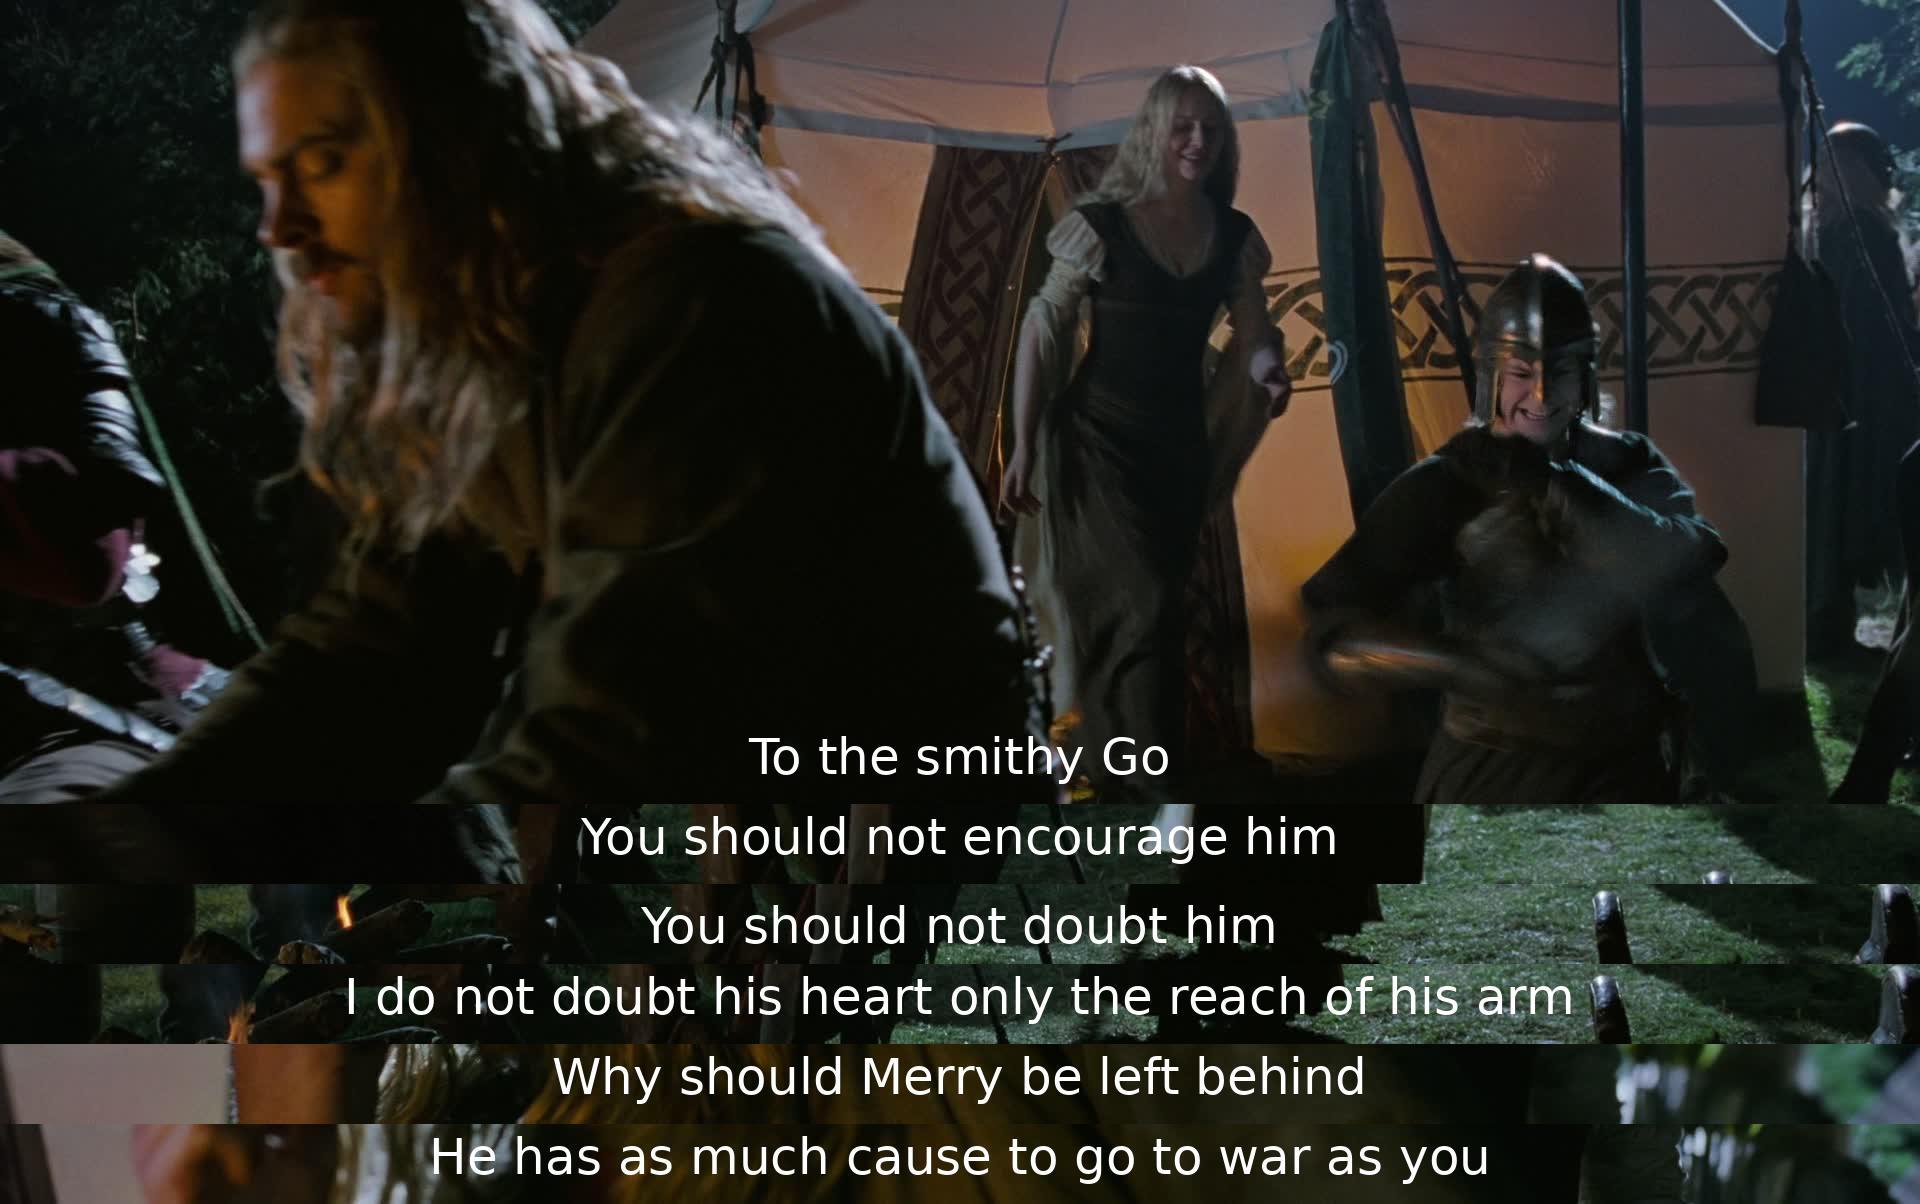 The characters discuss encouraging the smithy despite doubts about his ability. They debate whether Merry should join the war, arguing he has the same cause as others.